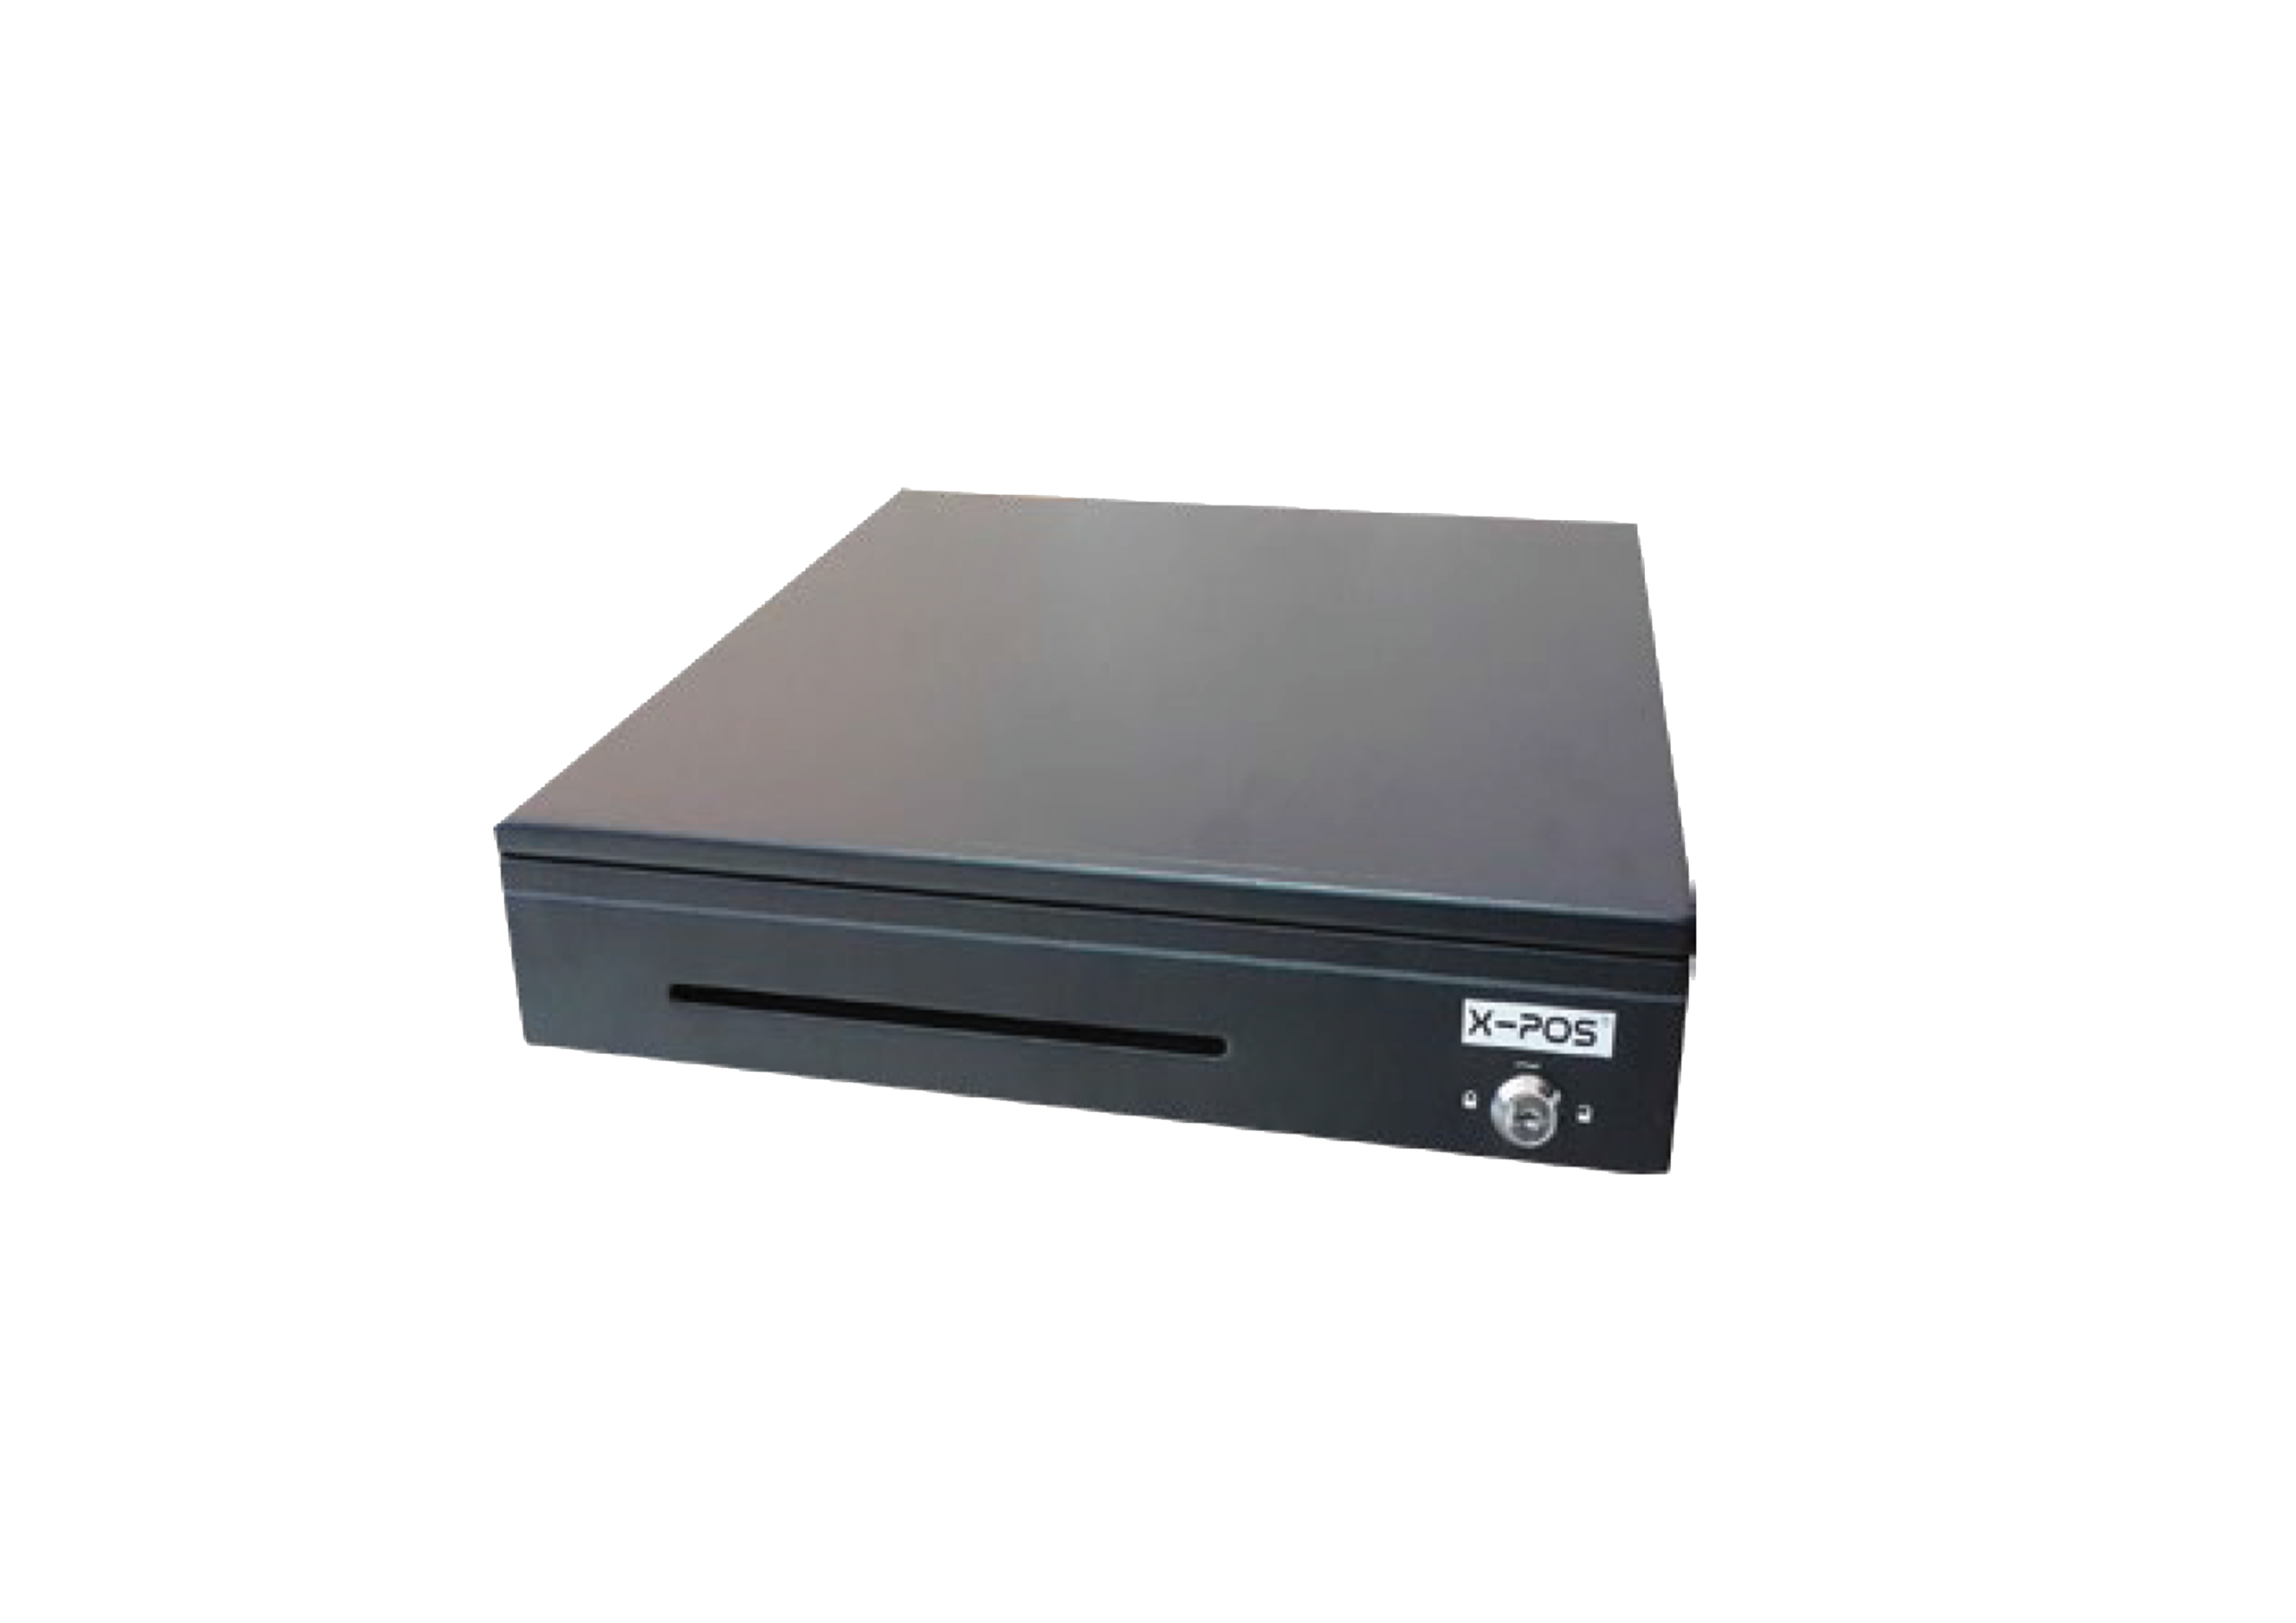 X-POS ( Point Of Sale) BC-410 Cash Drawer - Marvel Africa Technologies